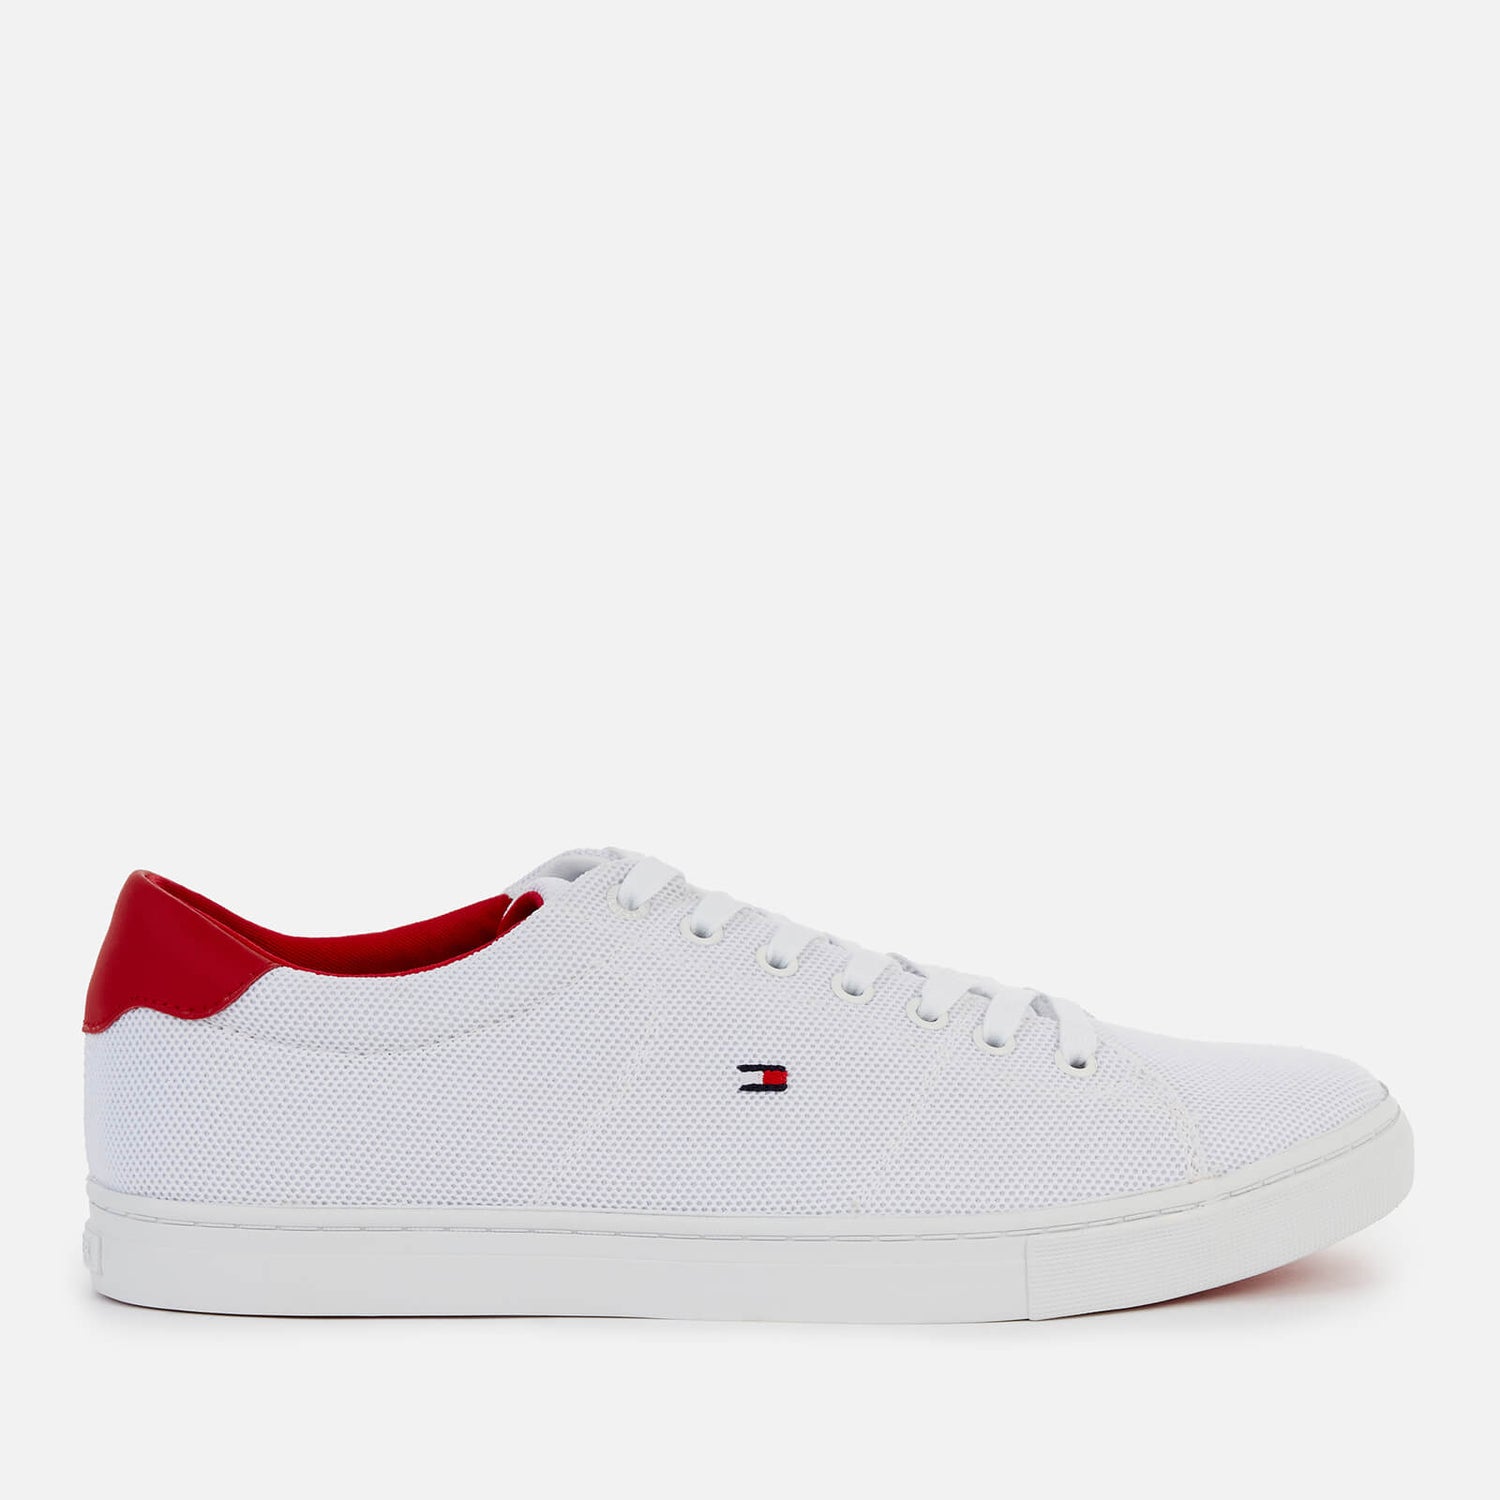 Tommy Hilfiger Men's Sustainable Essential Knit Vulcanised Trainers - White/Primary Red